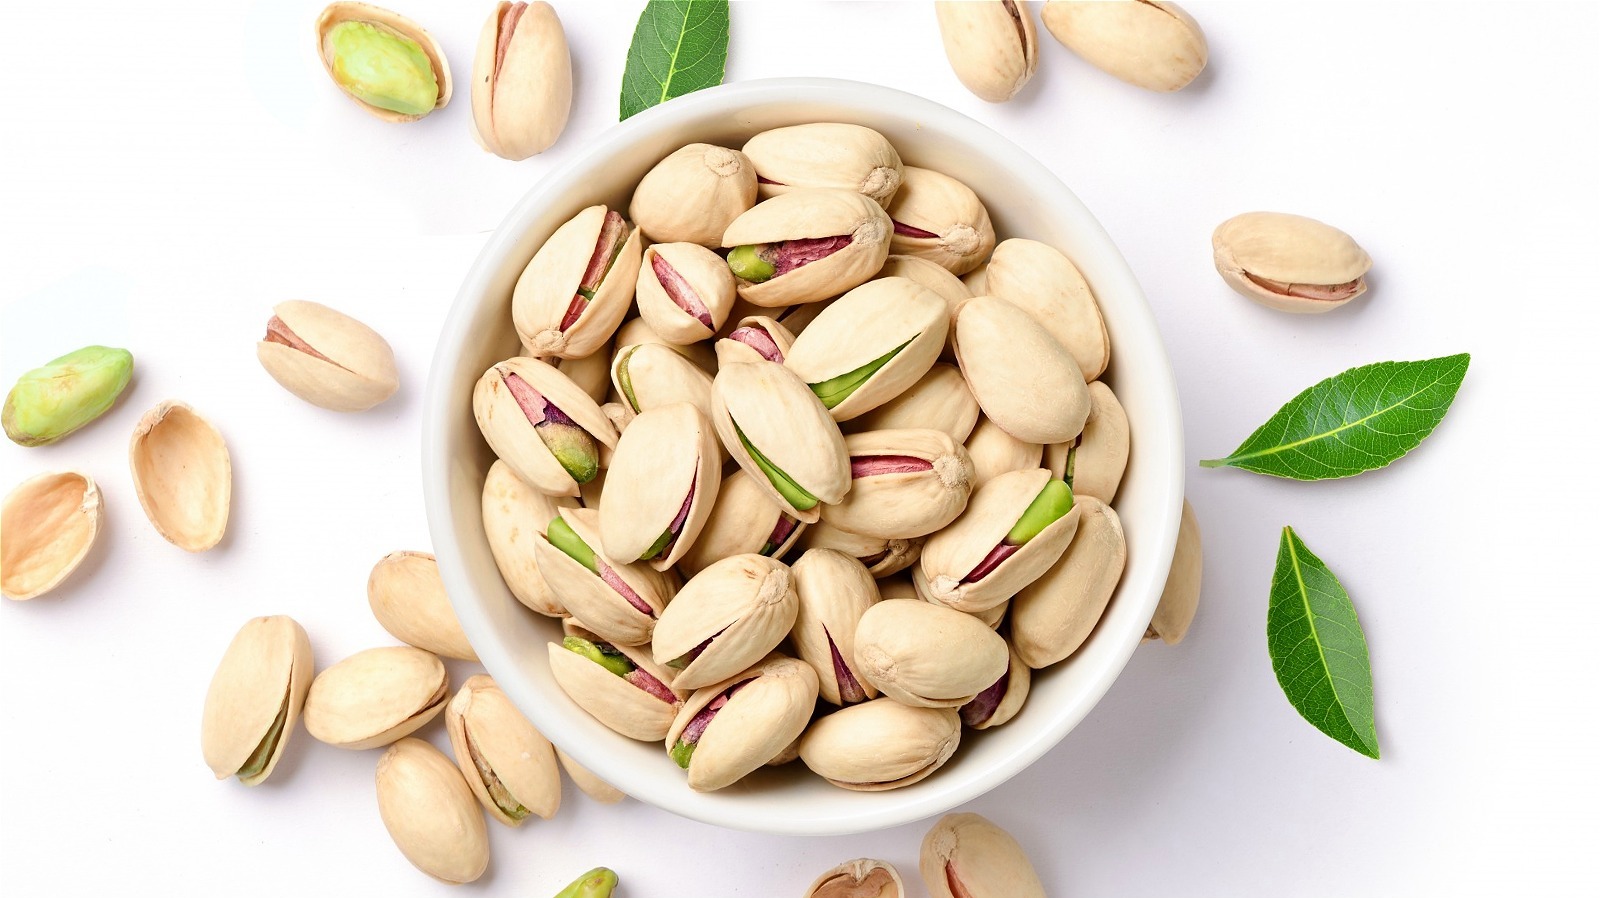 https://www.thedailymeal.com/img/gallery/why-pistachios-are-often-sold-in-their-shells/l-intro-1667403337.jpg